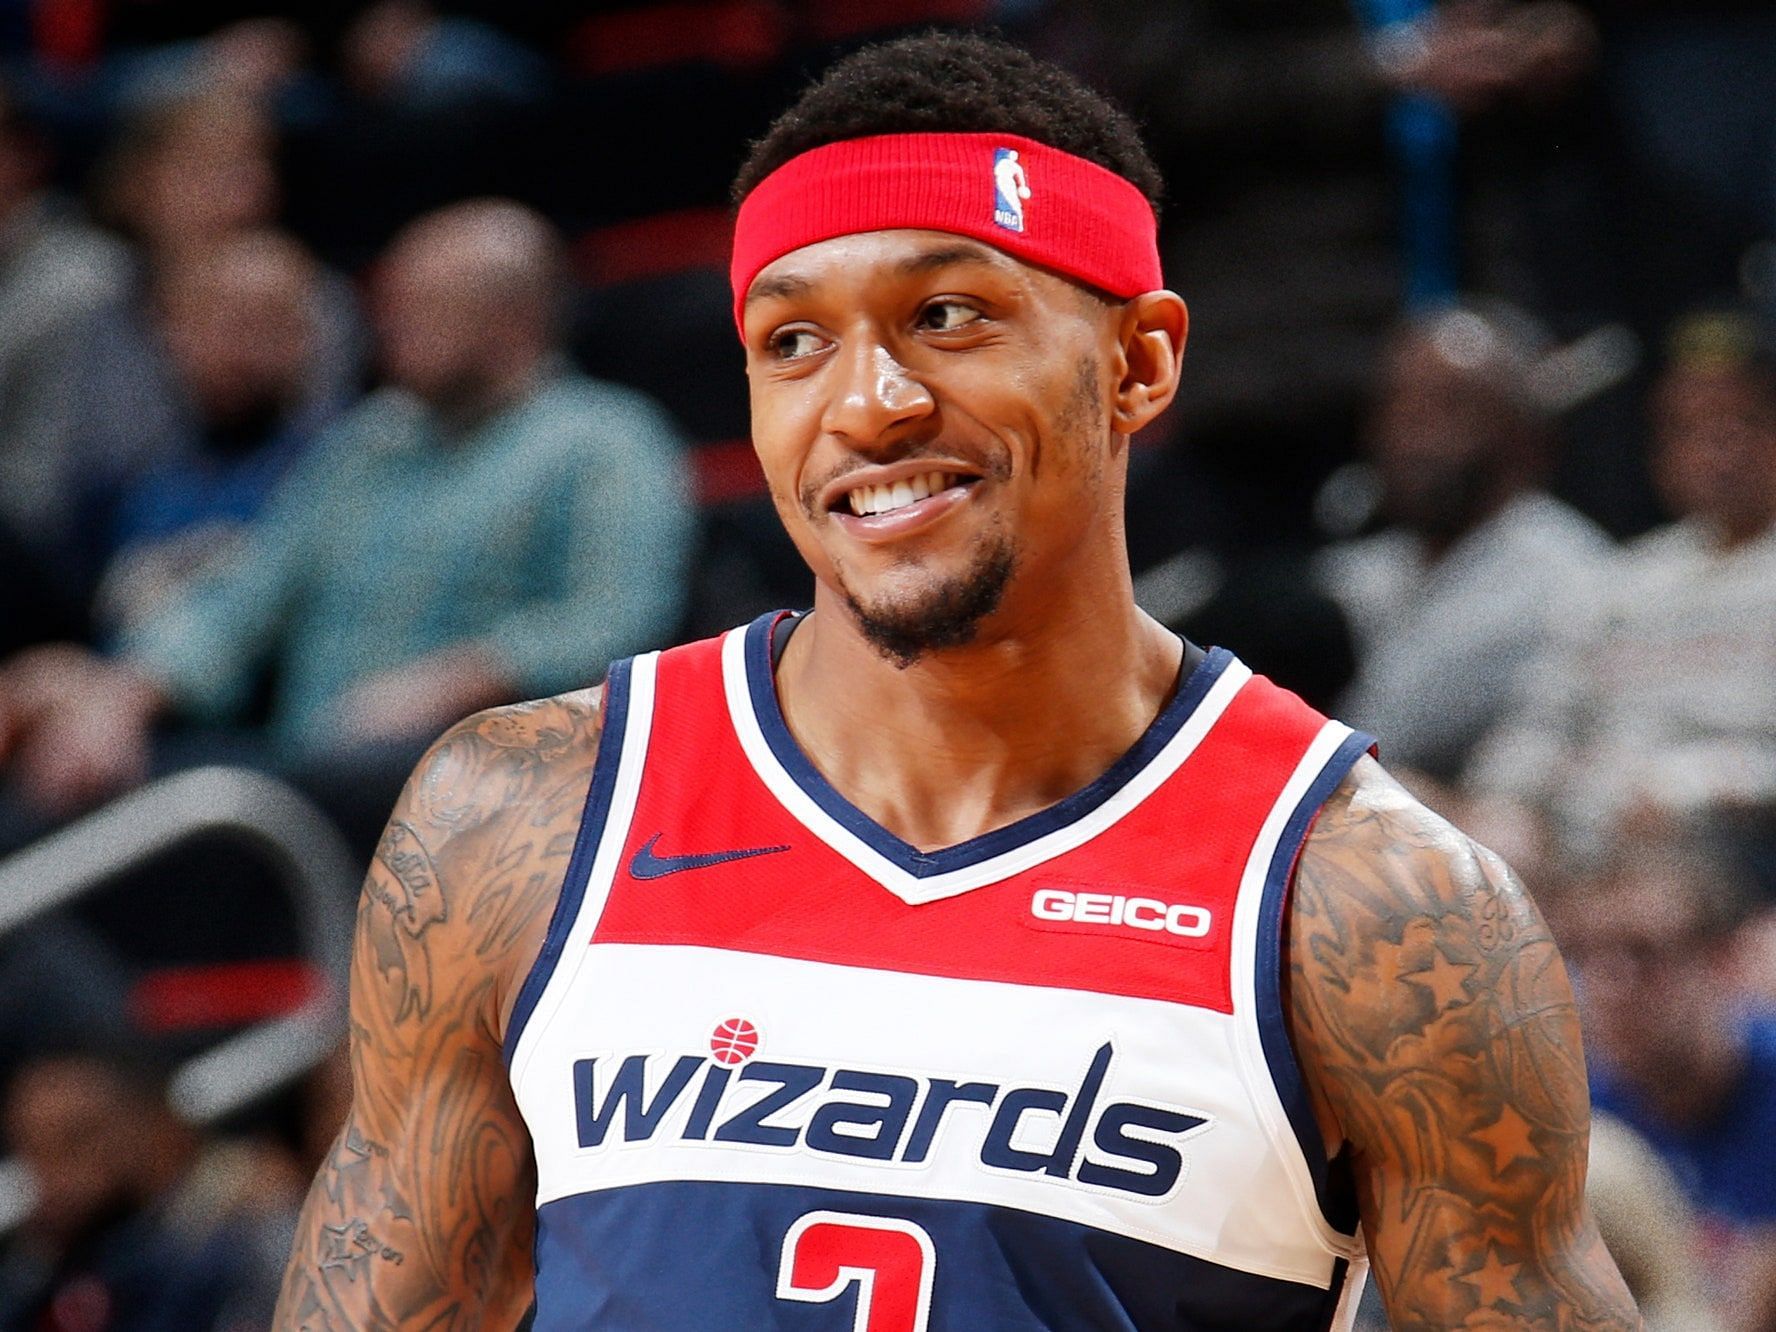 Bradley Beal of the Washington Wizards is now an unrestricted free agent after declining the player option of his contract. [Photo: GQ]